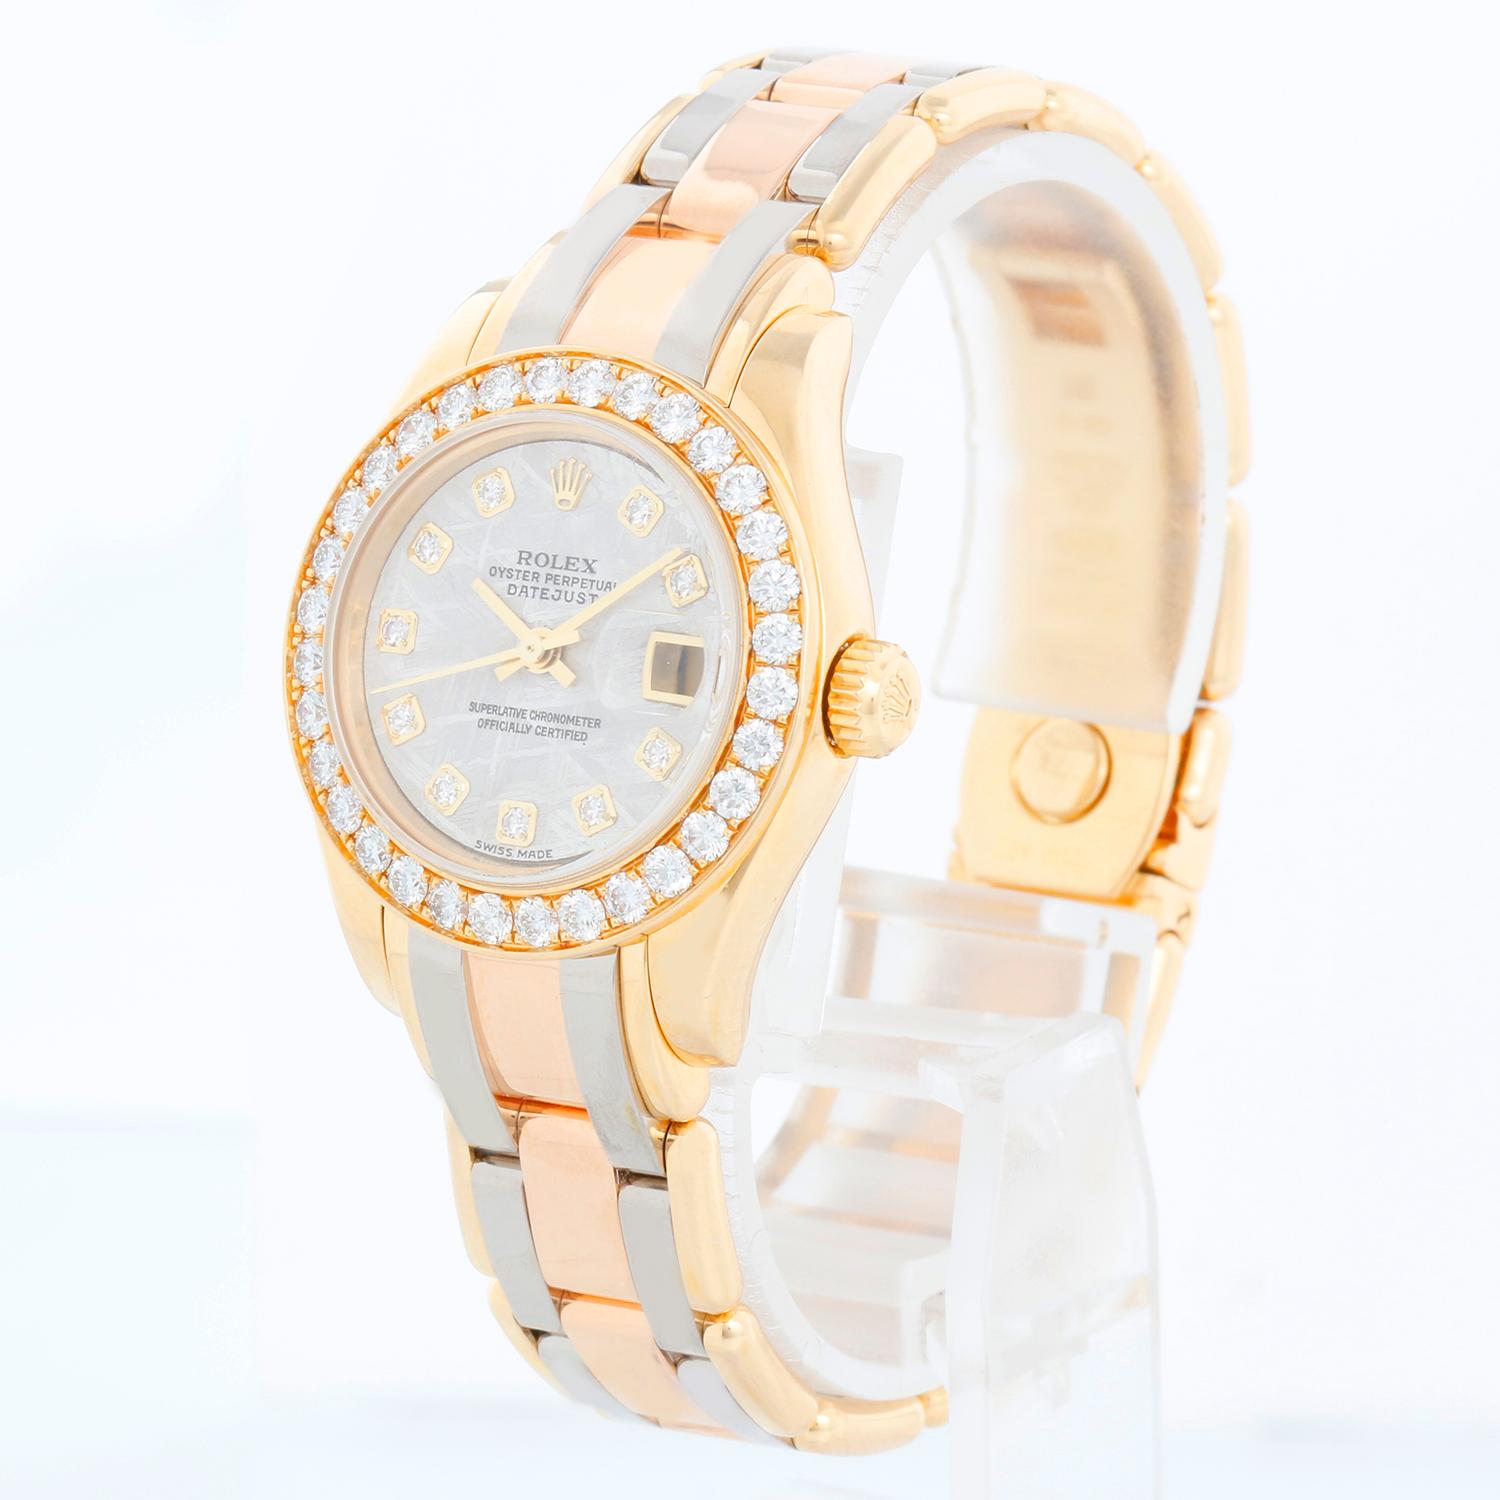 Rolex Tridor Pearlmaster Ladies Watch 80298 - Automatic. 18k yellow gold case with factory diamond bezel ( 29 mm ). Genuine Rolex Meteorite diamond dial. 18k yellow gold Rolex Tridor Pearlmaster bracelet with 2 rows of 18k white gold links and a